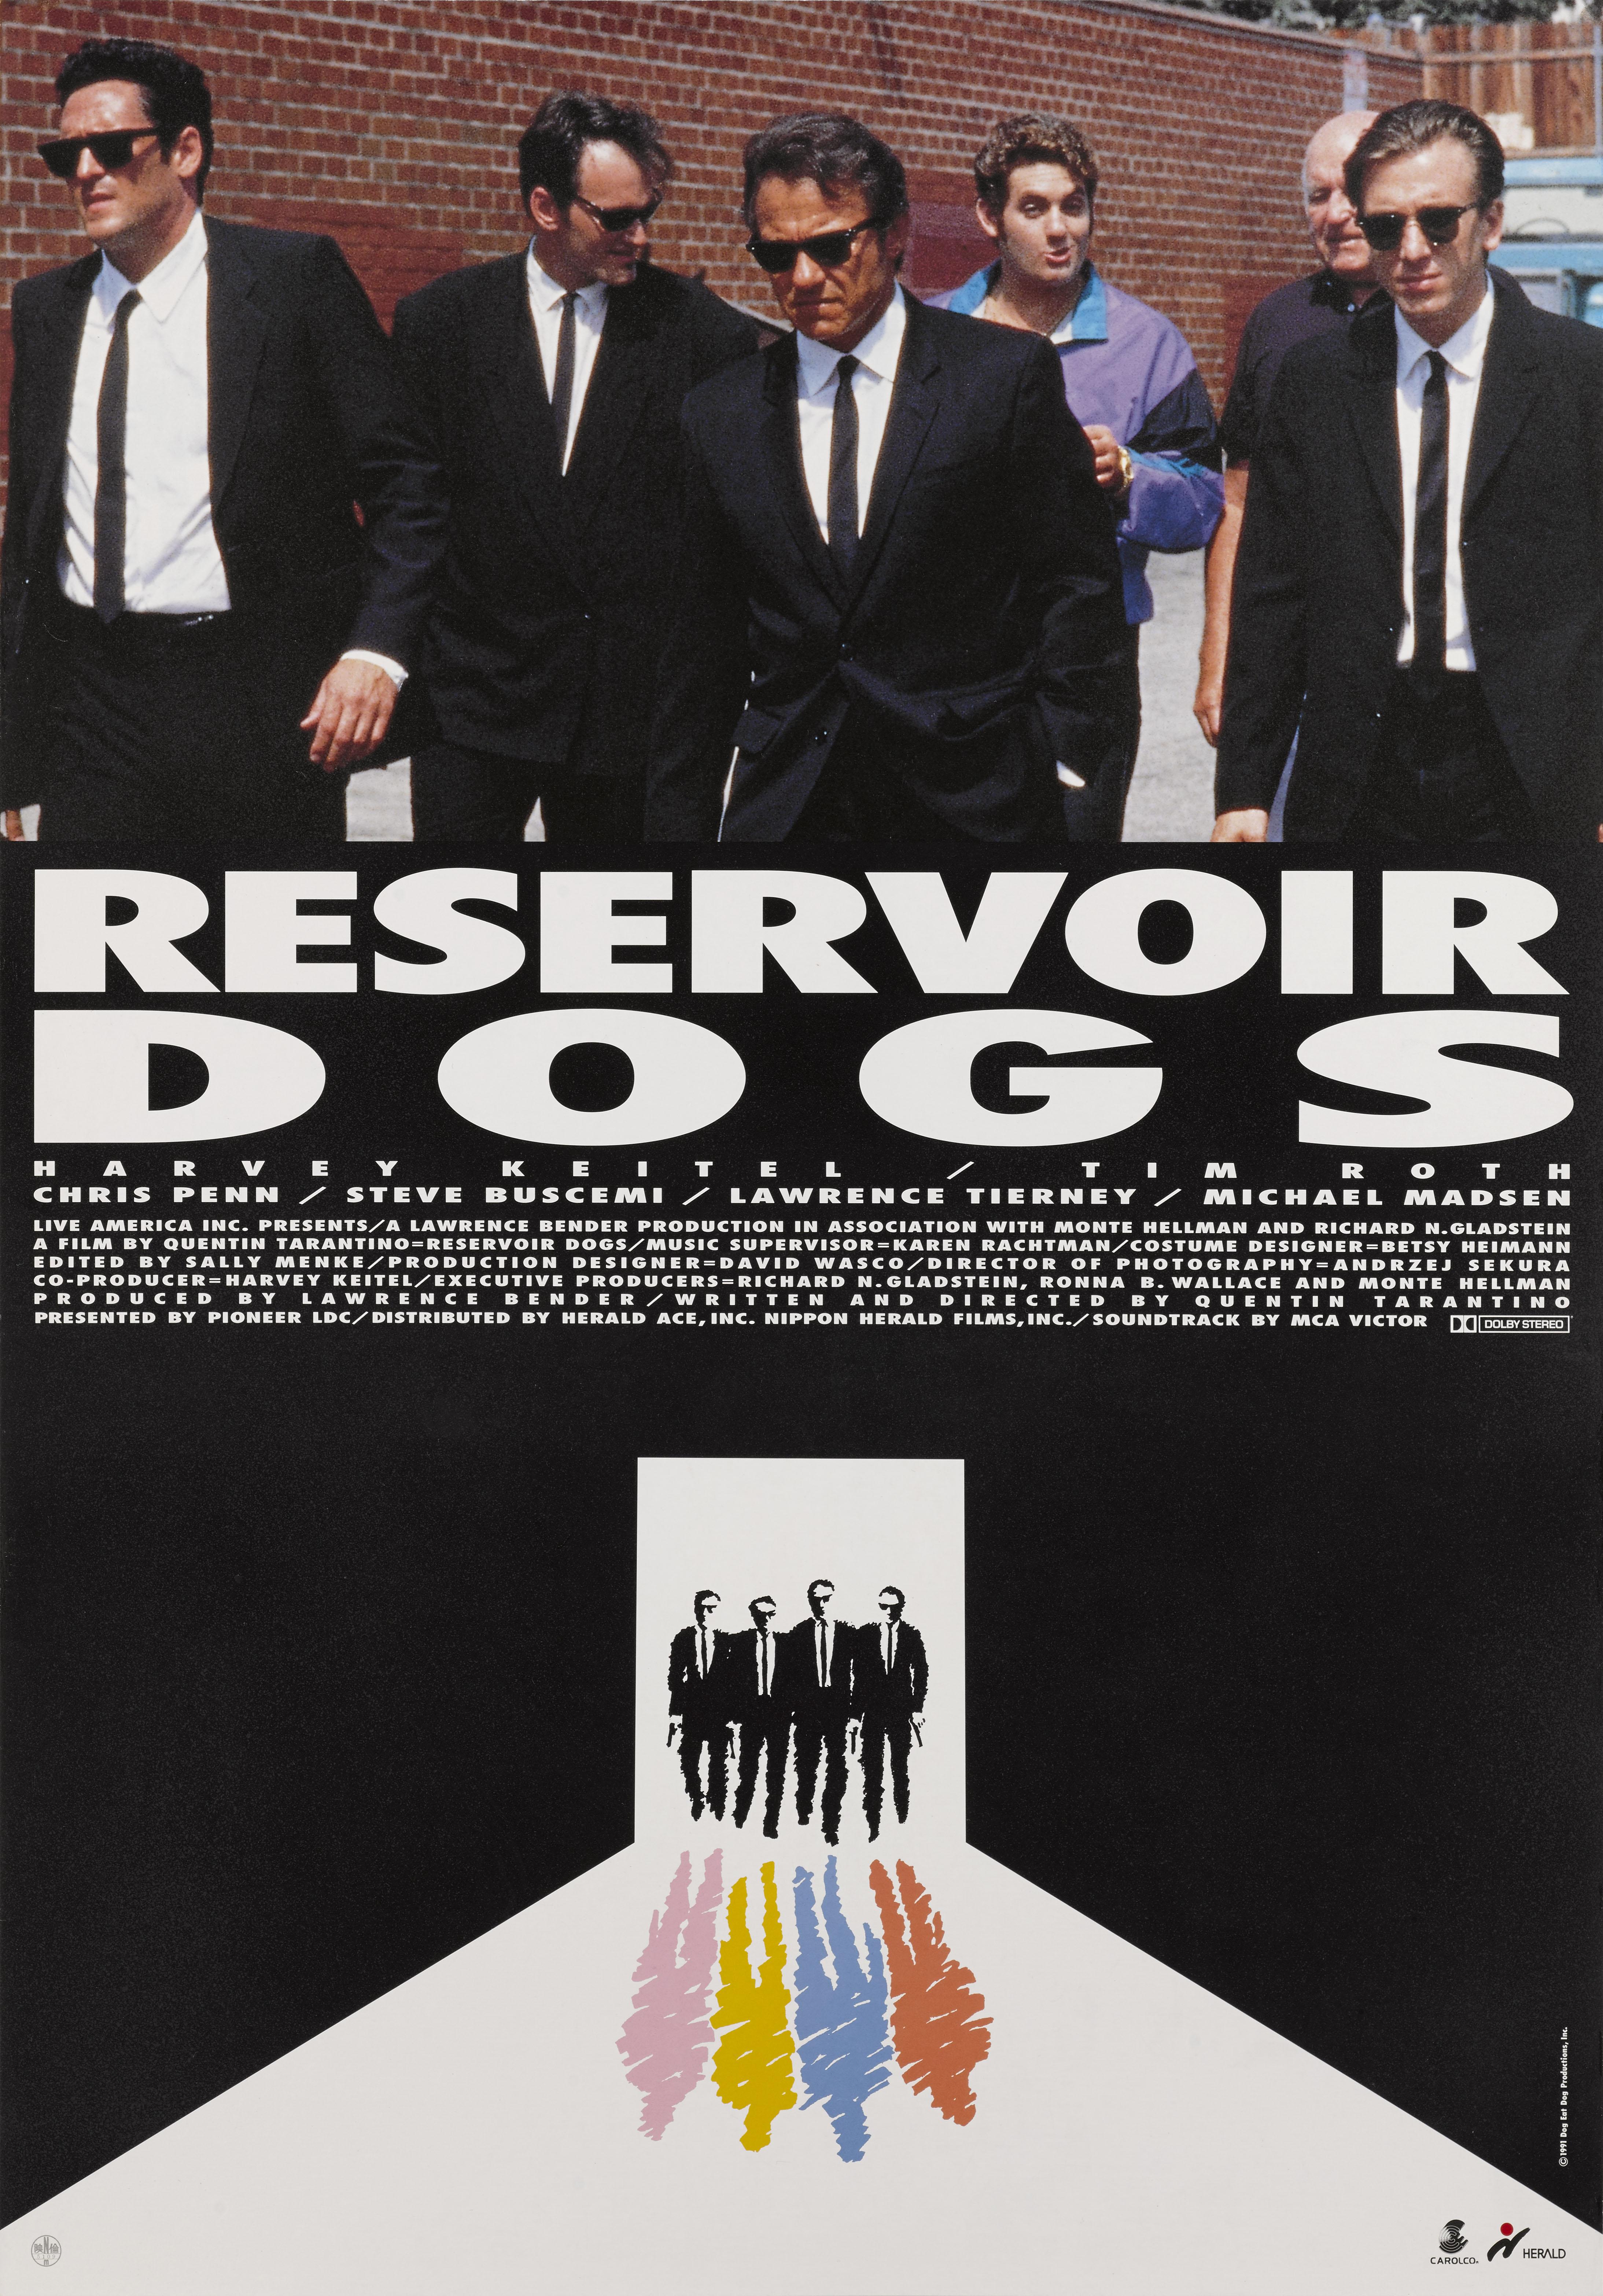 Original Japanese film poster for Quentin Tarantino's fist film Reservoir Dogs 1992.
The artwork on this Japanese poster was used for the Cannes Film Festival poster and is very different to the regular US poster.
 
 